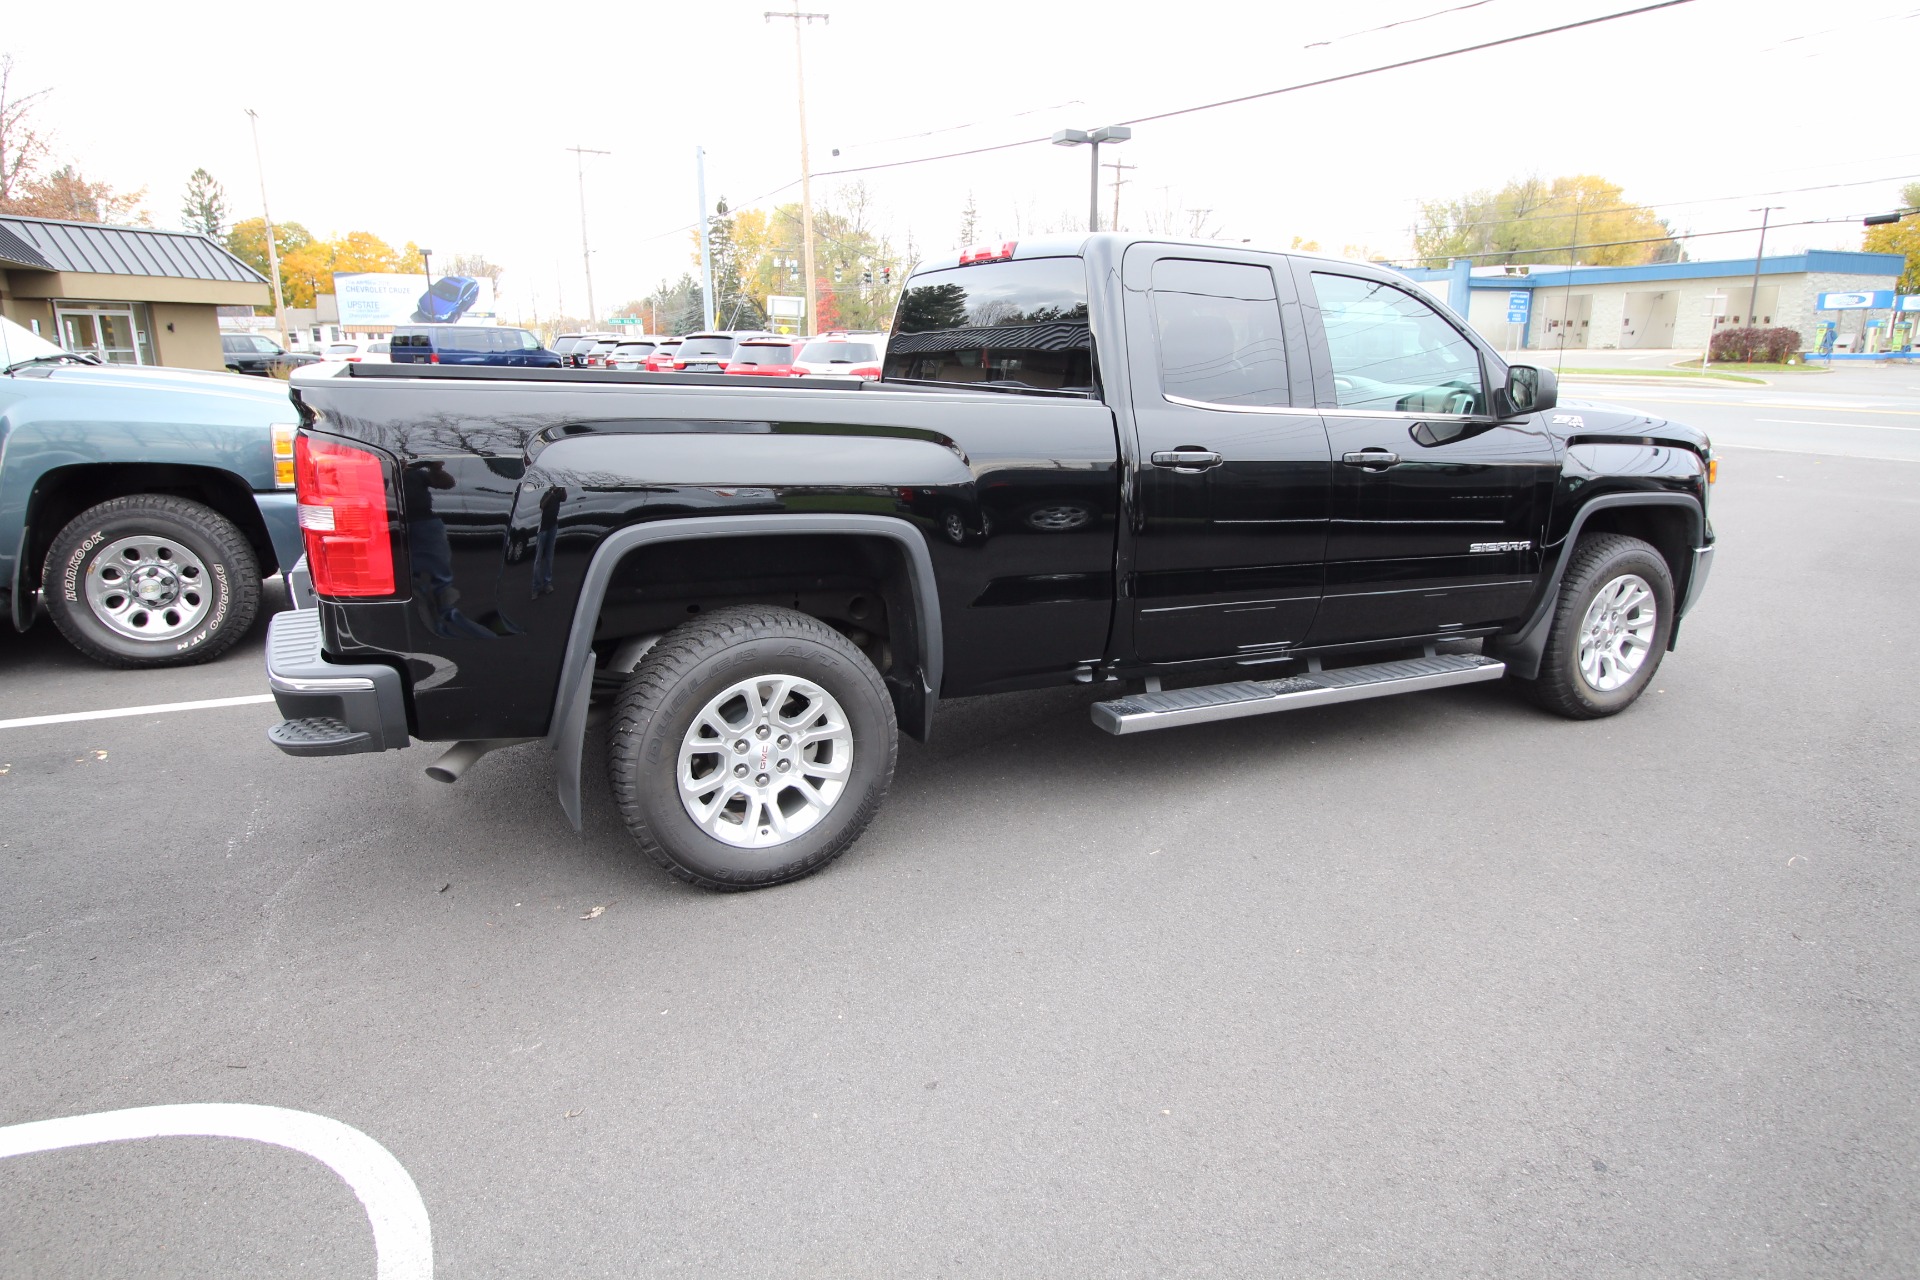 2015 Gmc Sierra 1500 Sle Z71 4wd 4x4 Extended Cab Rearview Back Up